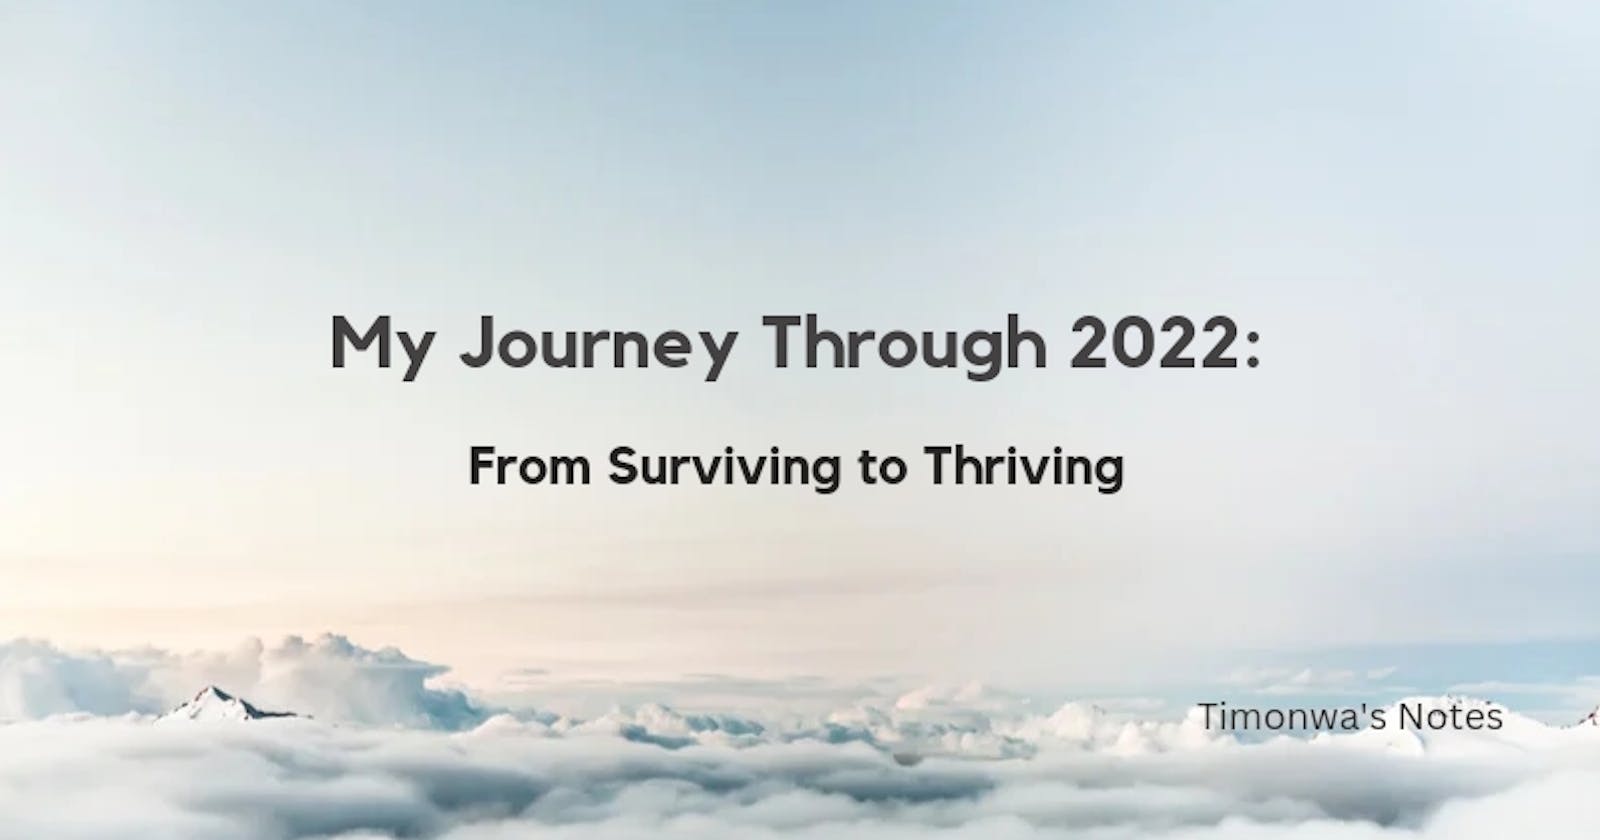 My Journey Through 2022: From Surviving to Thriving